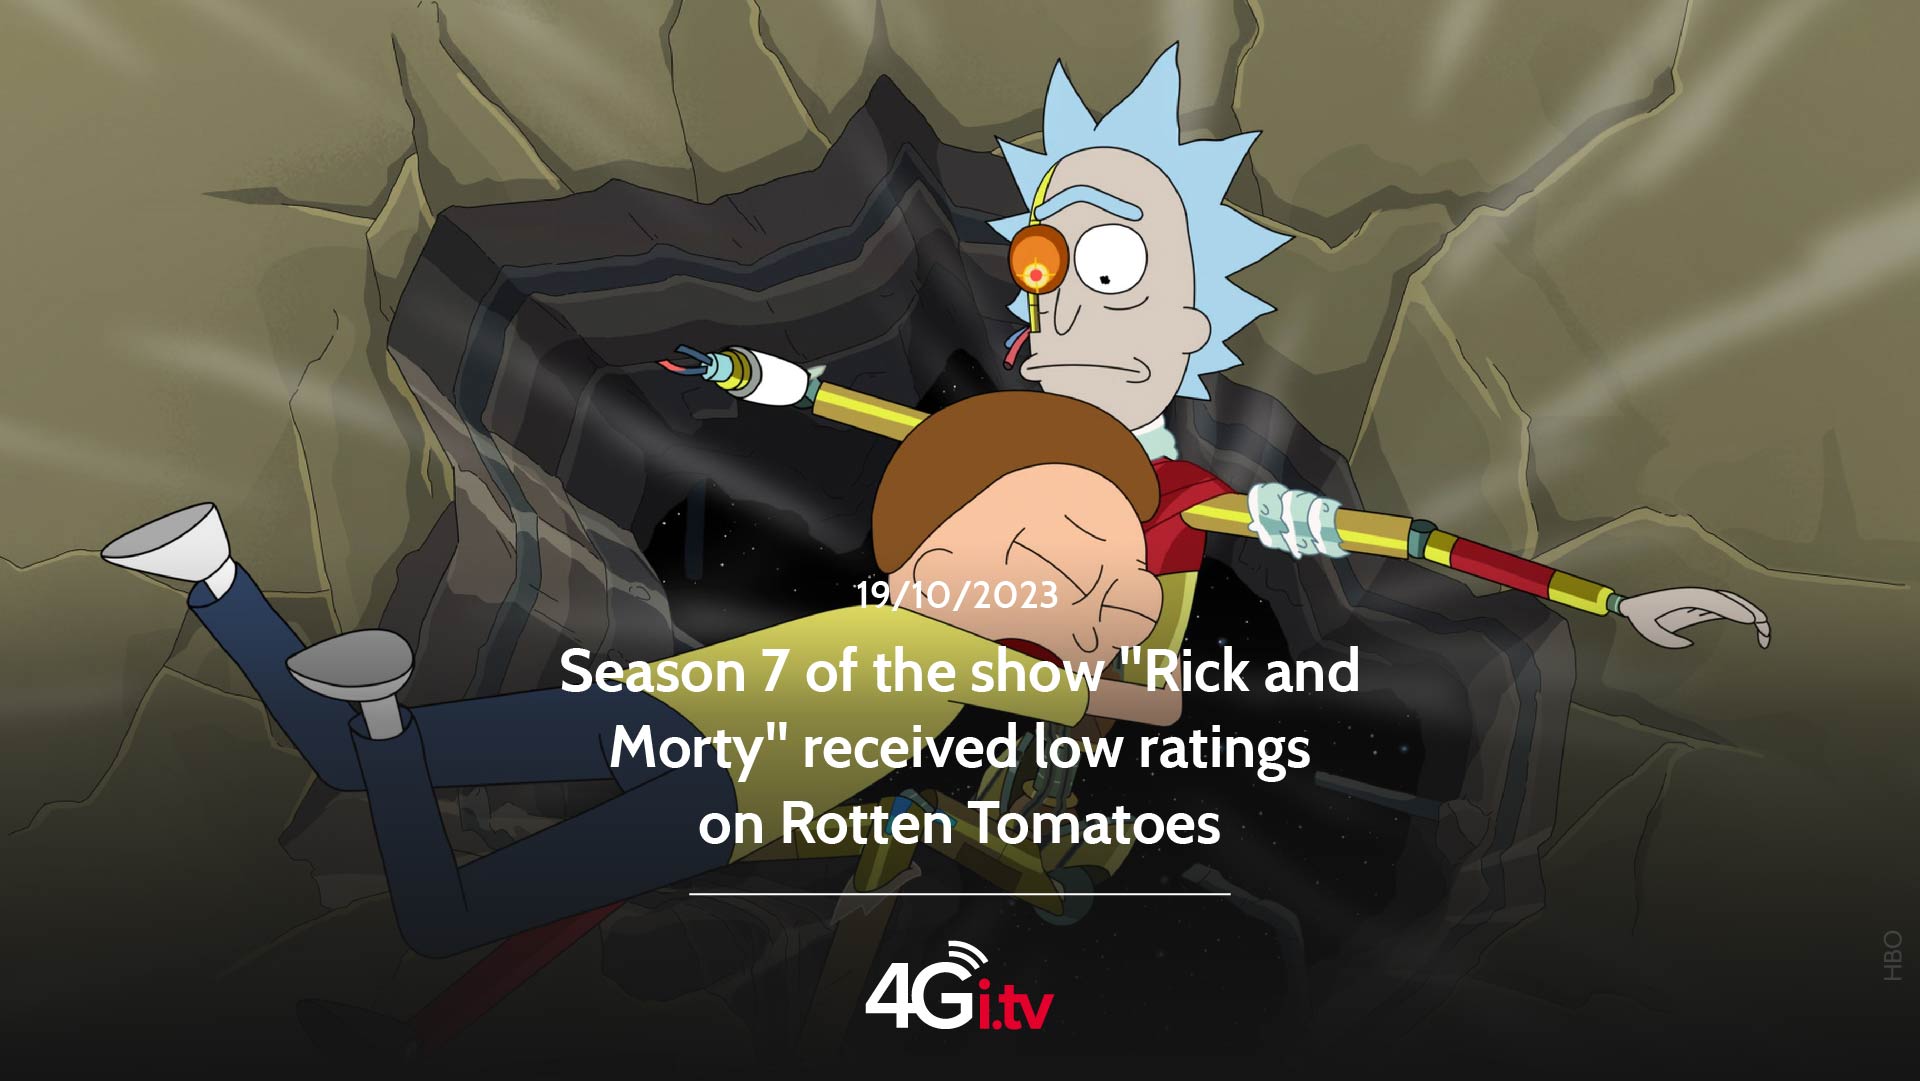 Подробнее о статье Season 7 of the show “Rick and Morty” received low ratings on Rotten Tomatoes